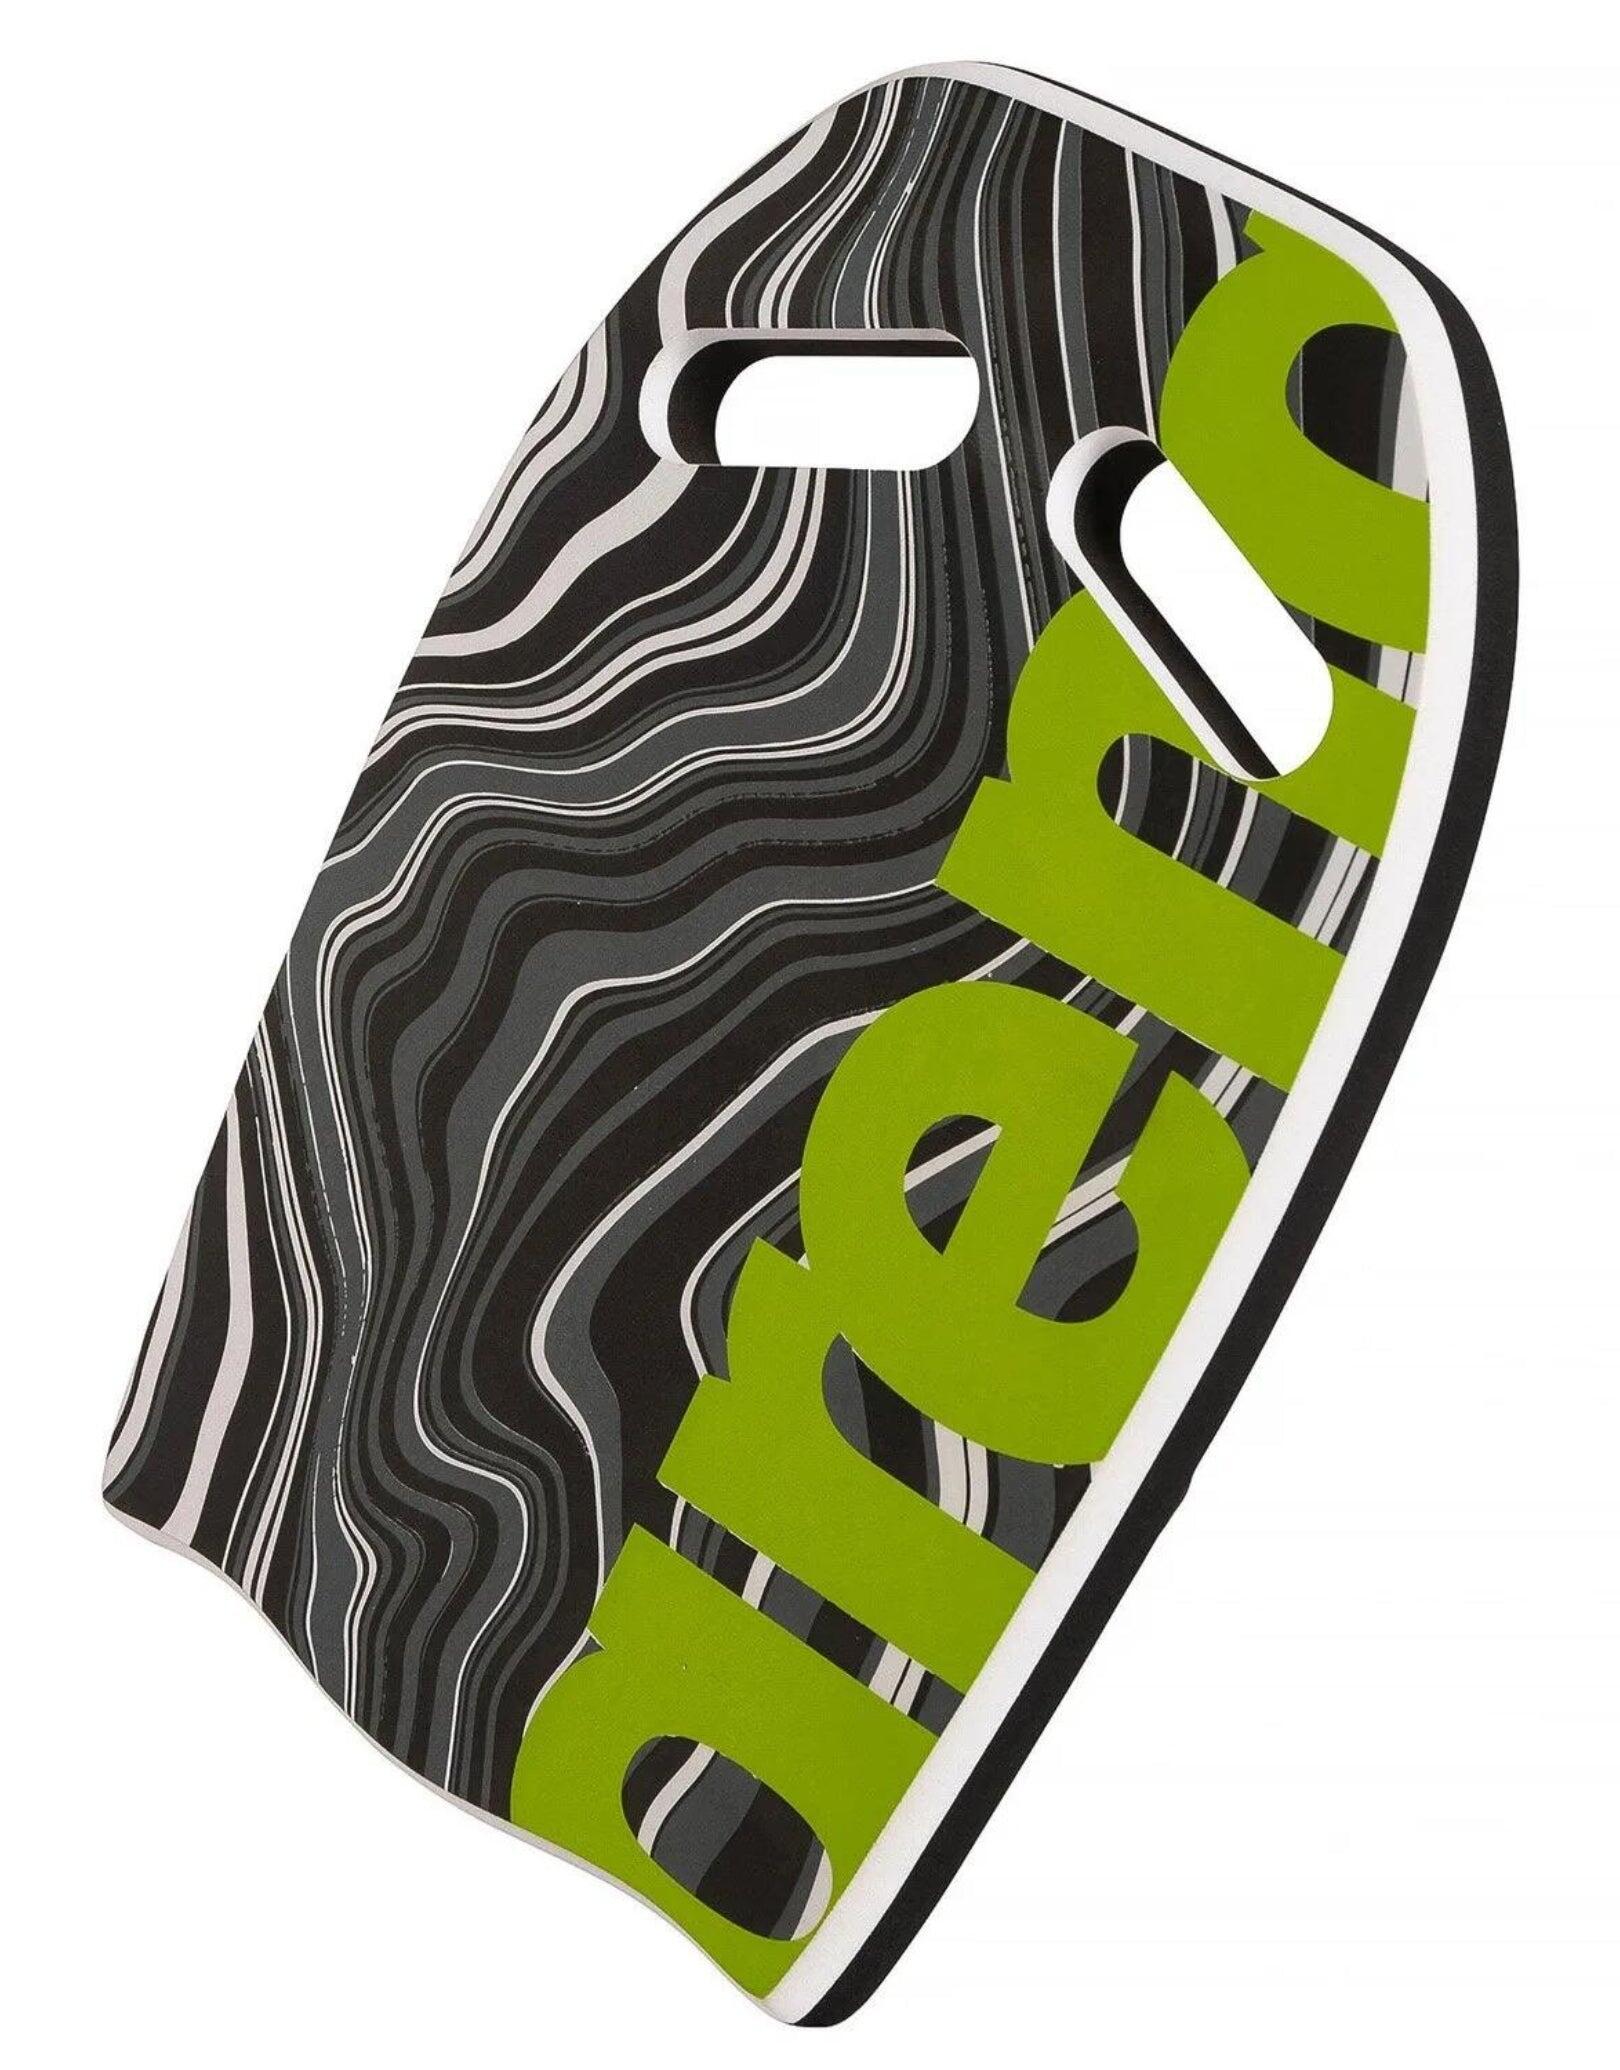 Arena Limited Edition Printed Kickboard - Marbled 3/4